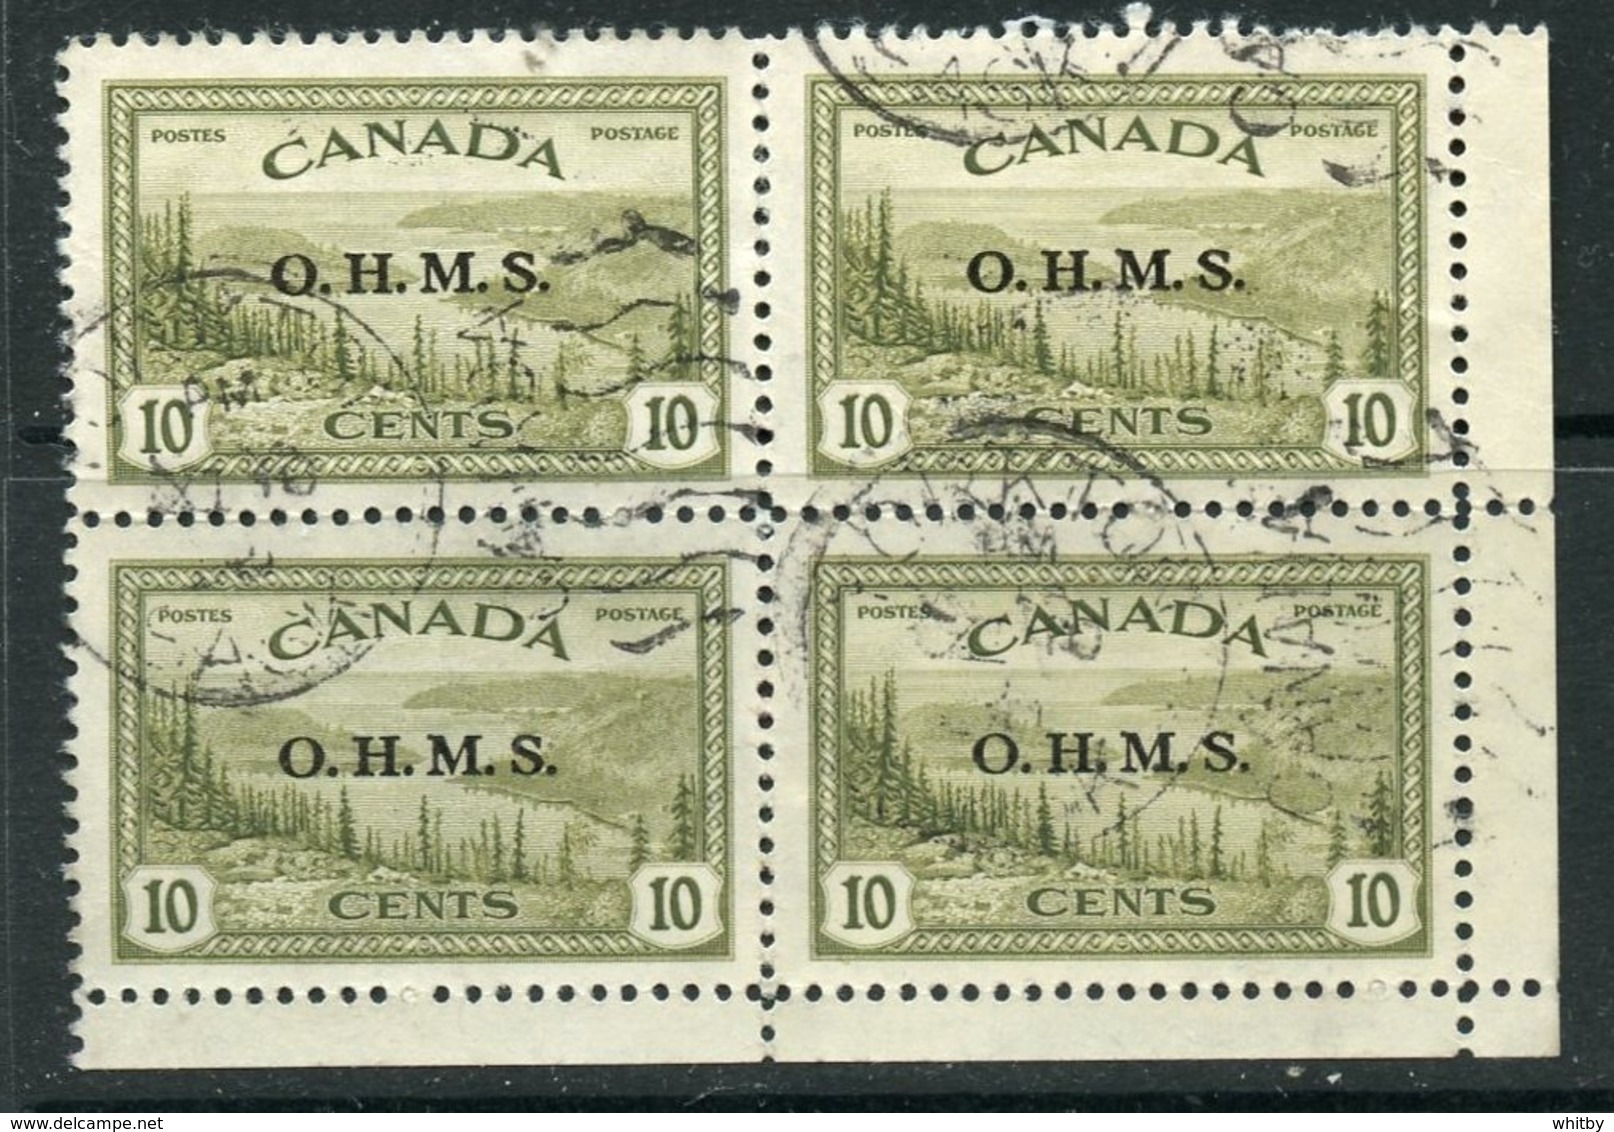 Canada 1949 Official 10 Cent Great Bear Lake  Issue Overprinted OHMS #O6 Block Of 4 - Opdrukken